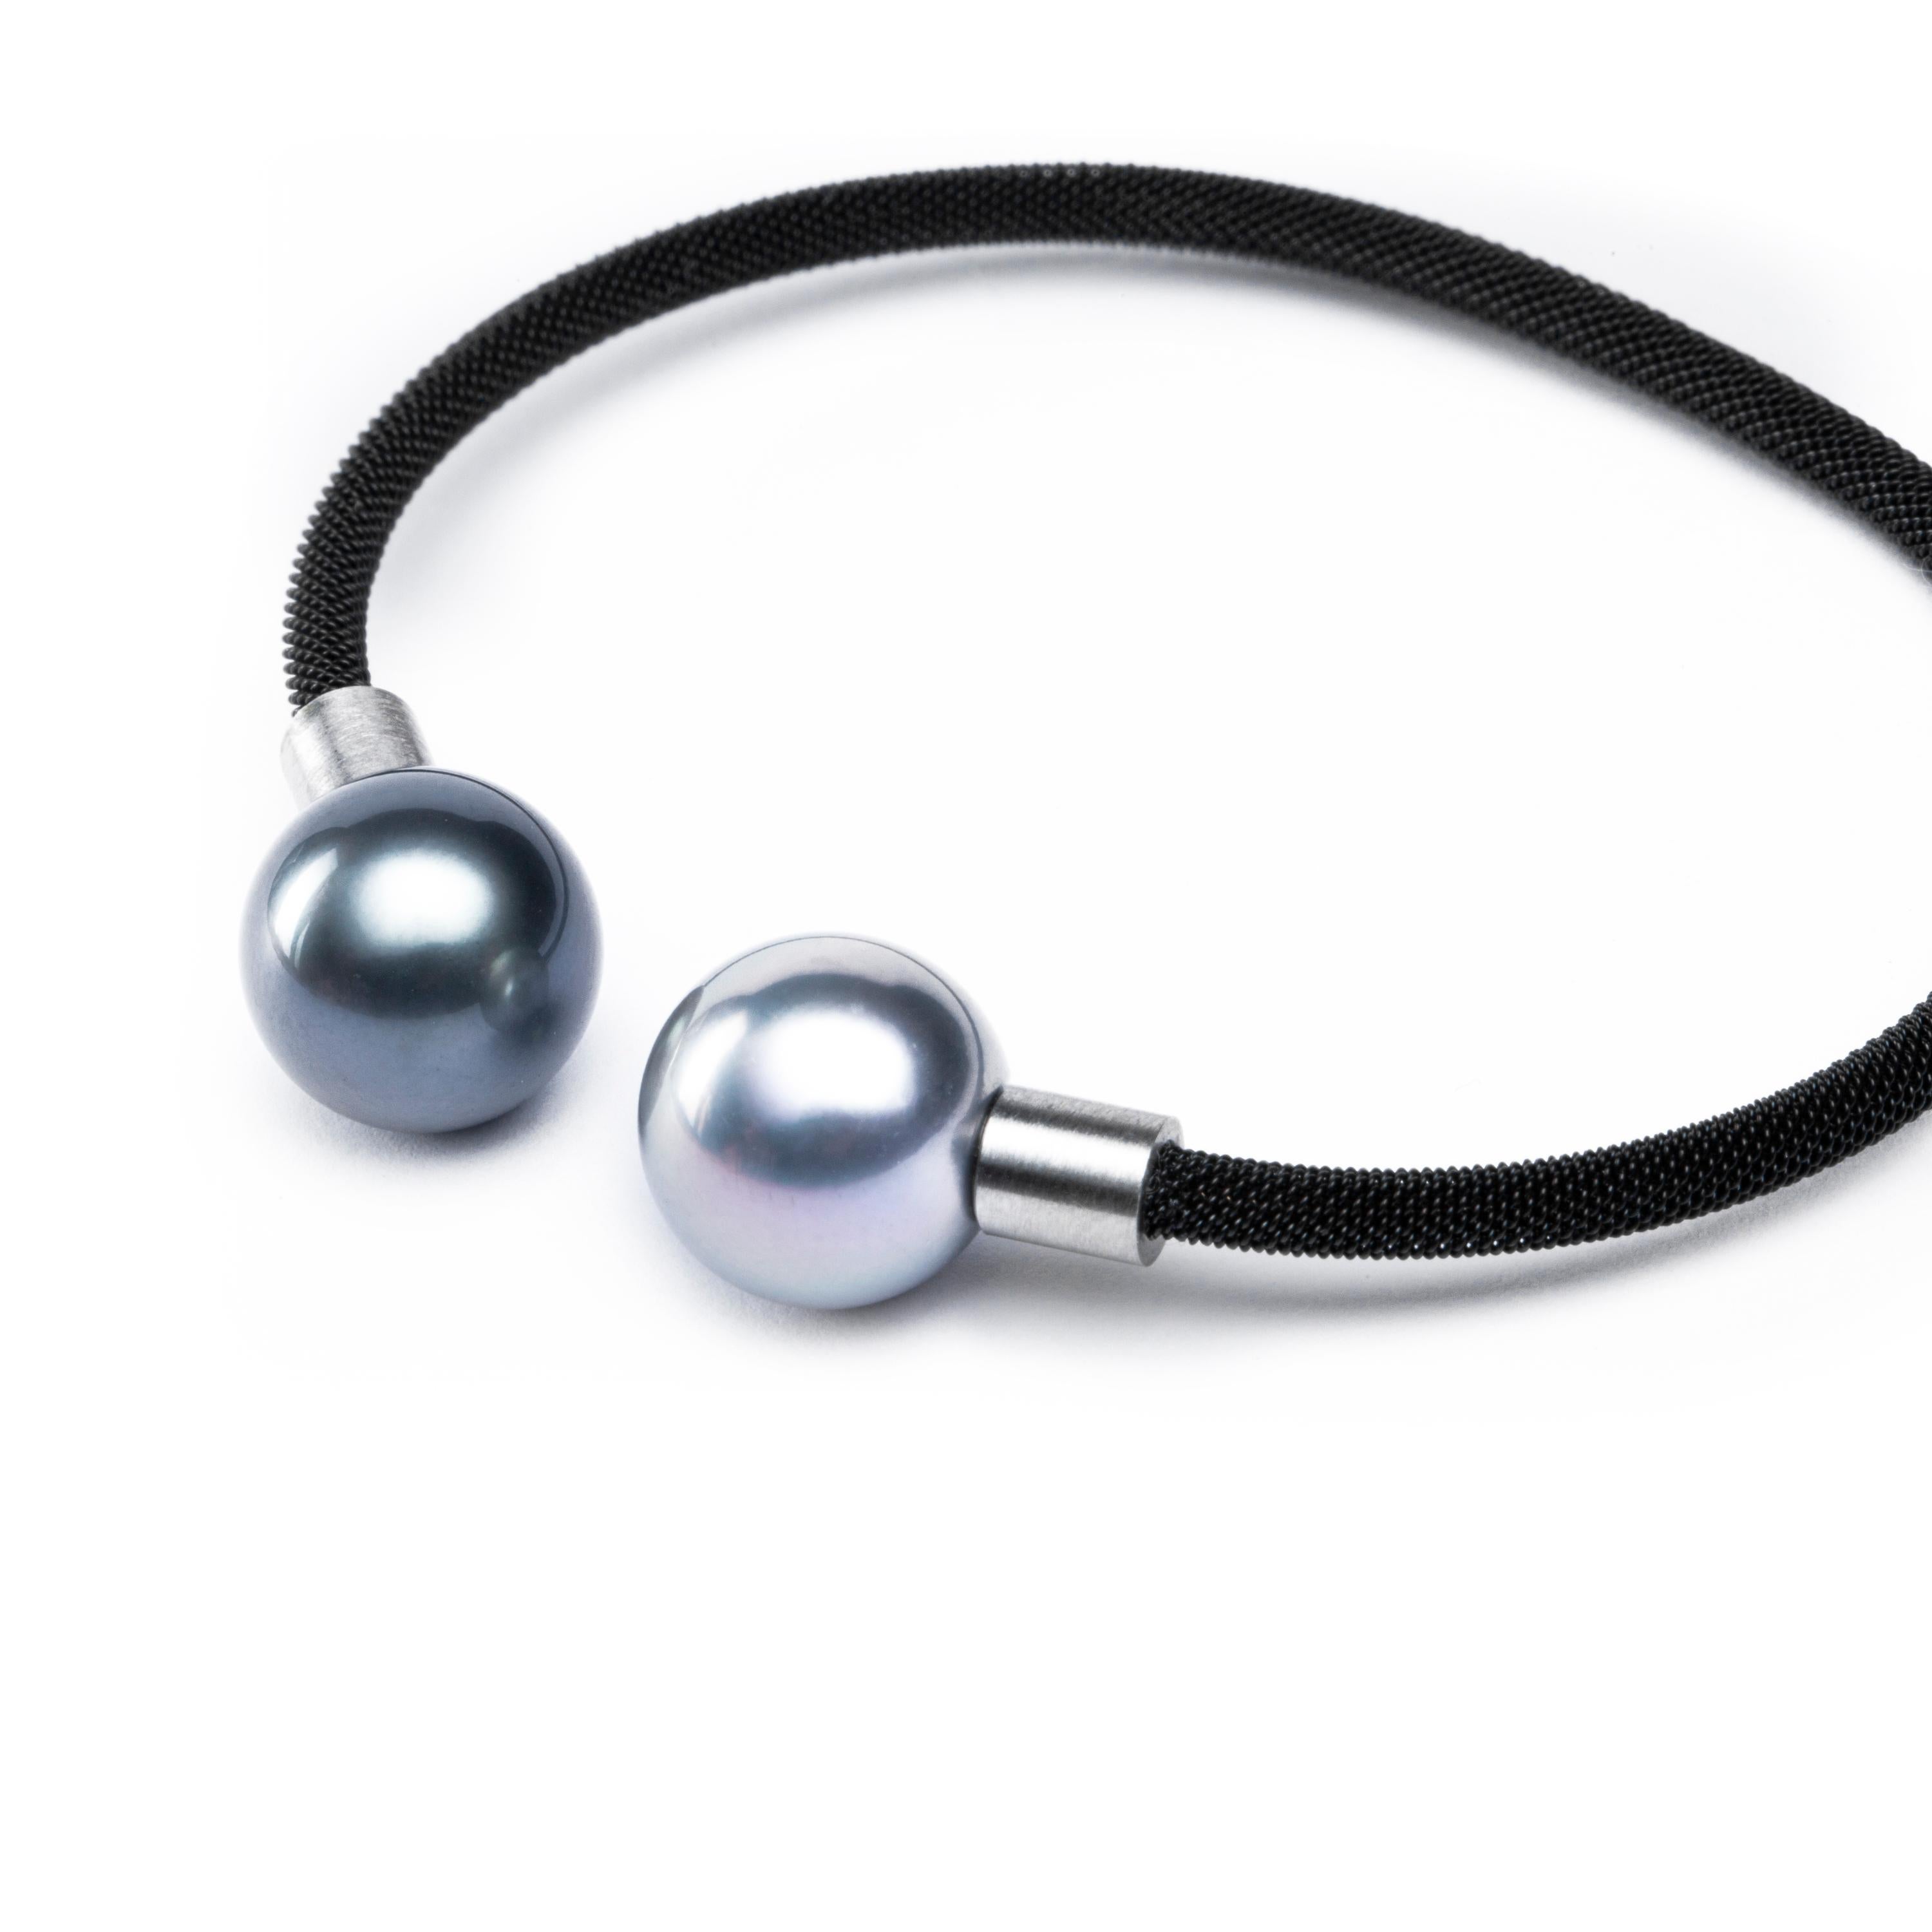 Alex Jona design collection, hand crafted in Italy, stainless steel bangle bracelet featuring two Tahitian grey pearls.
Dimension : W 2.32 in/ 58,92 mm X H 2.08 in / 53 mm
Internal : W 2.13 in/ 54.11 mm X H 1.52 in / 38.76 mm
- Pearl : Diameter 0.43